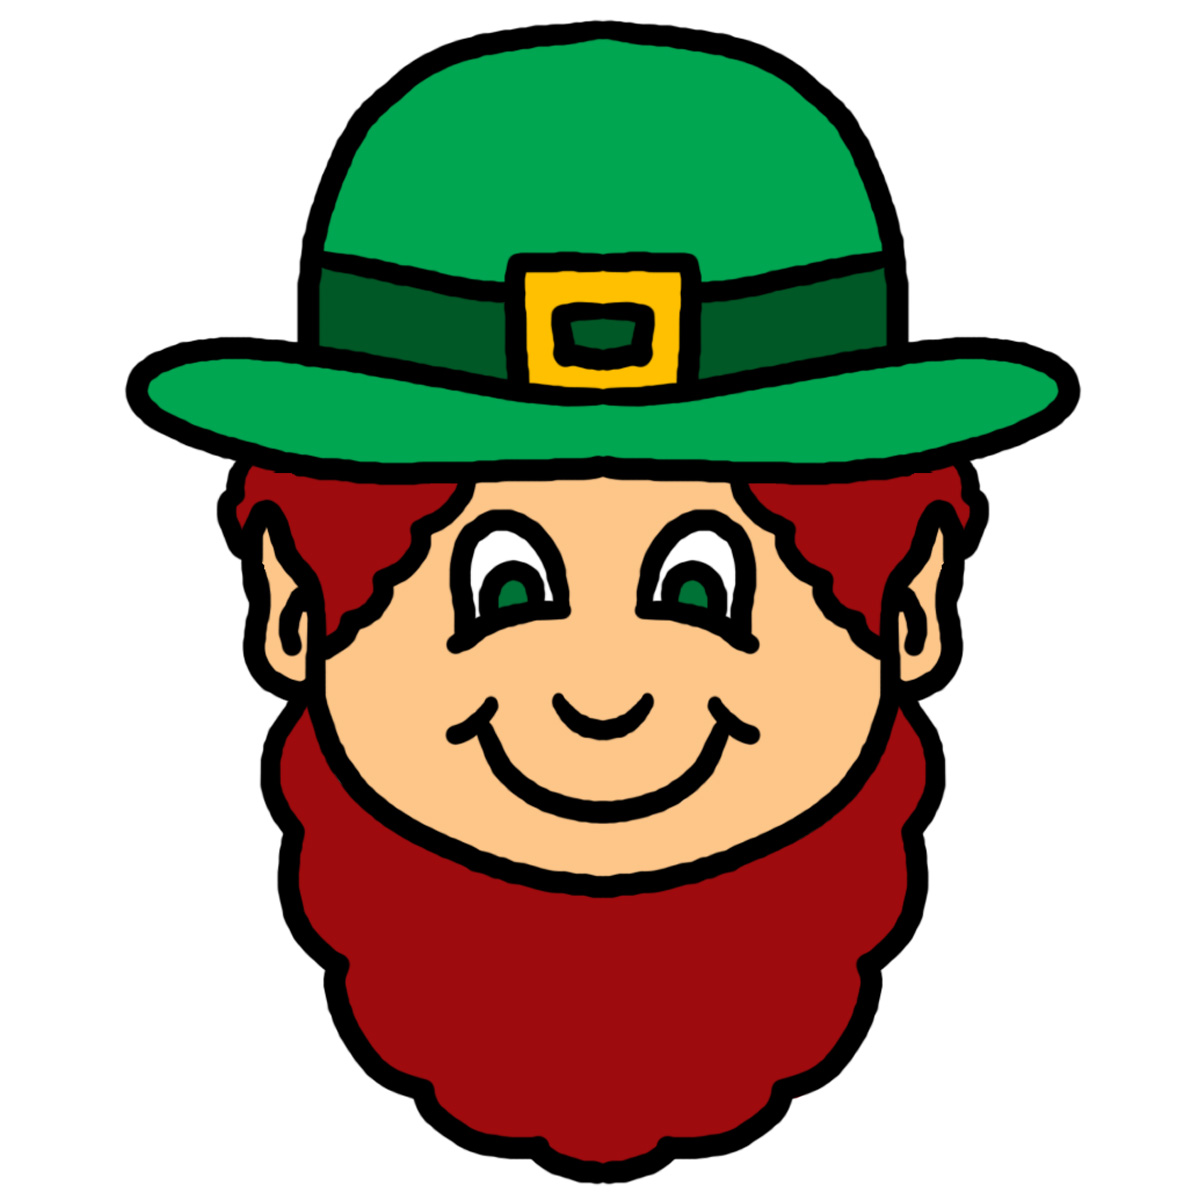 Cartoon Pictures Of Leprechauns - Cliparts.co